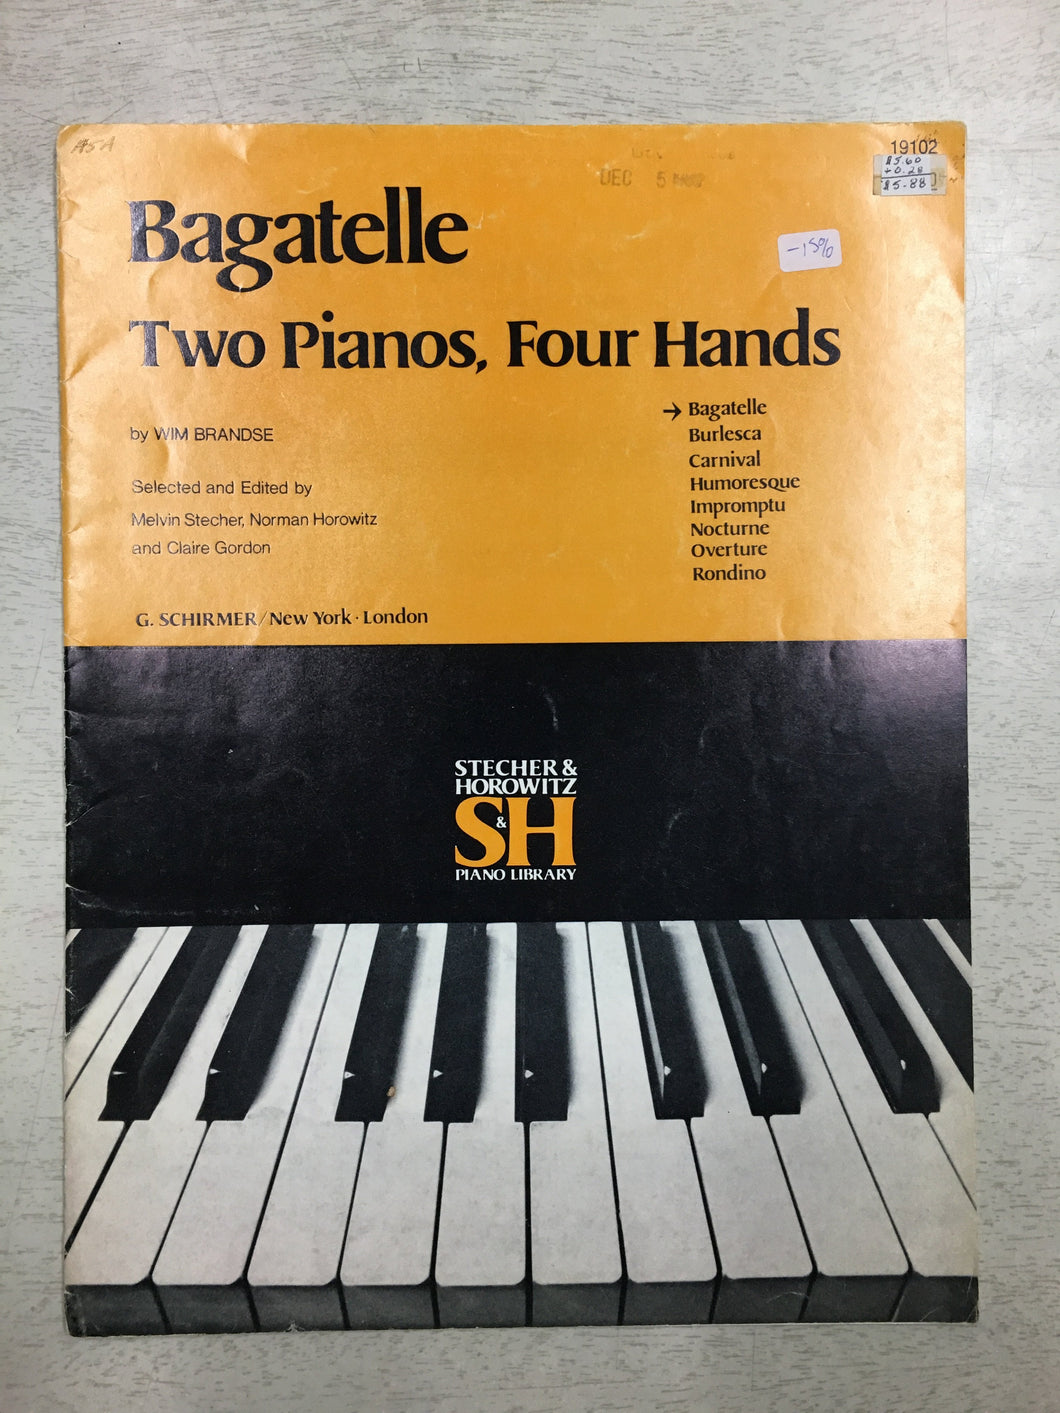 Bagatelle - Two Pianos, Four Hands, Wim Brandse